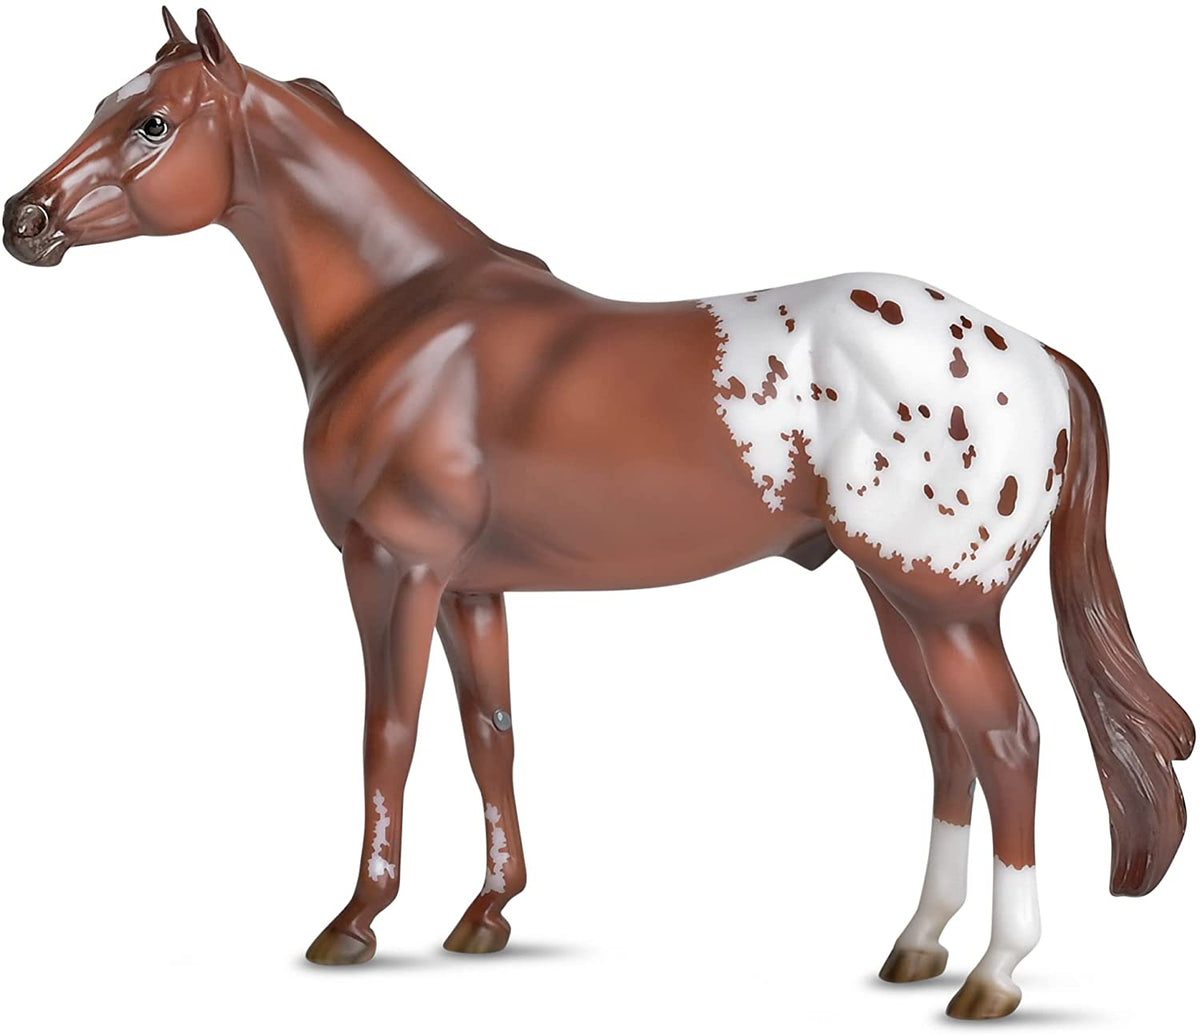 Breyer Horses Traditional Series Ideal Series - Appaloosa | Limited Edition | Horse Toy Model | 12.25" x 9.75" | 1:9 Scale | Model #1868